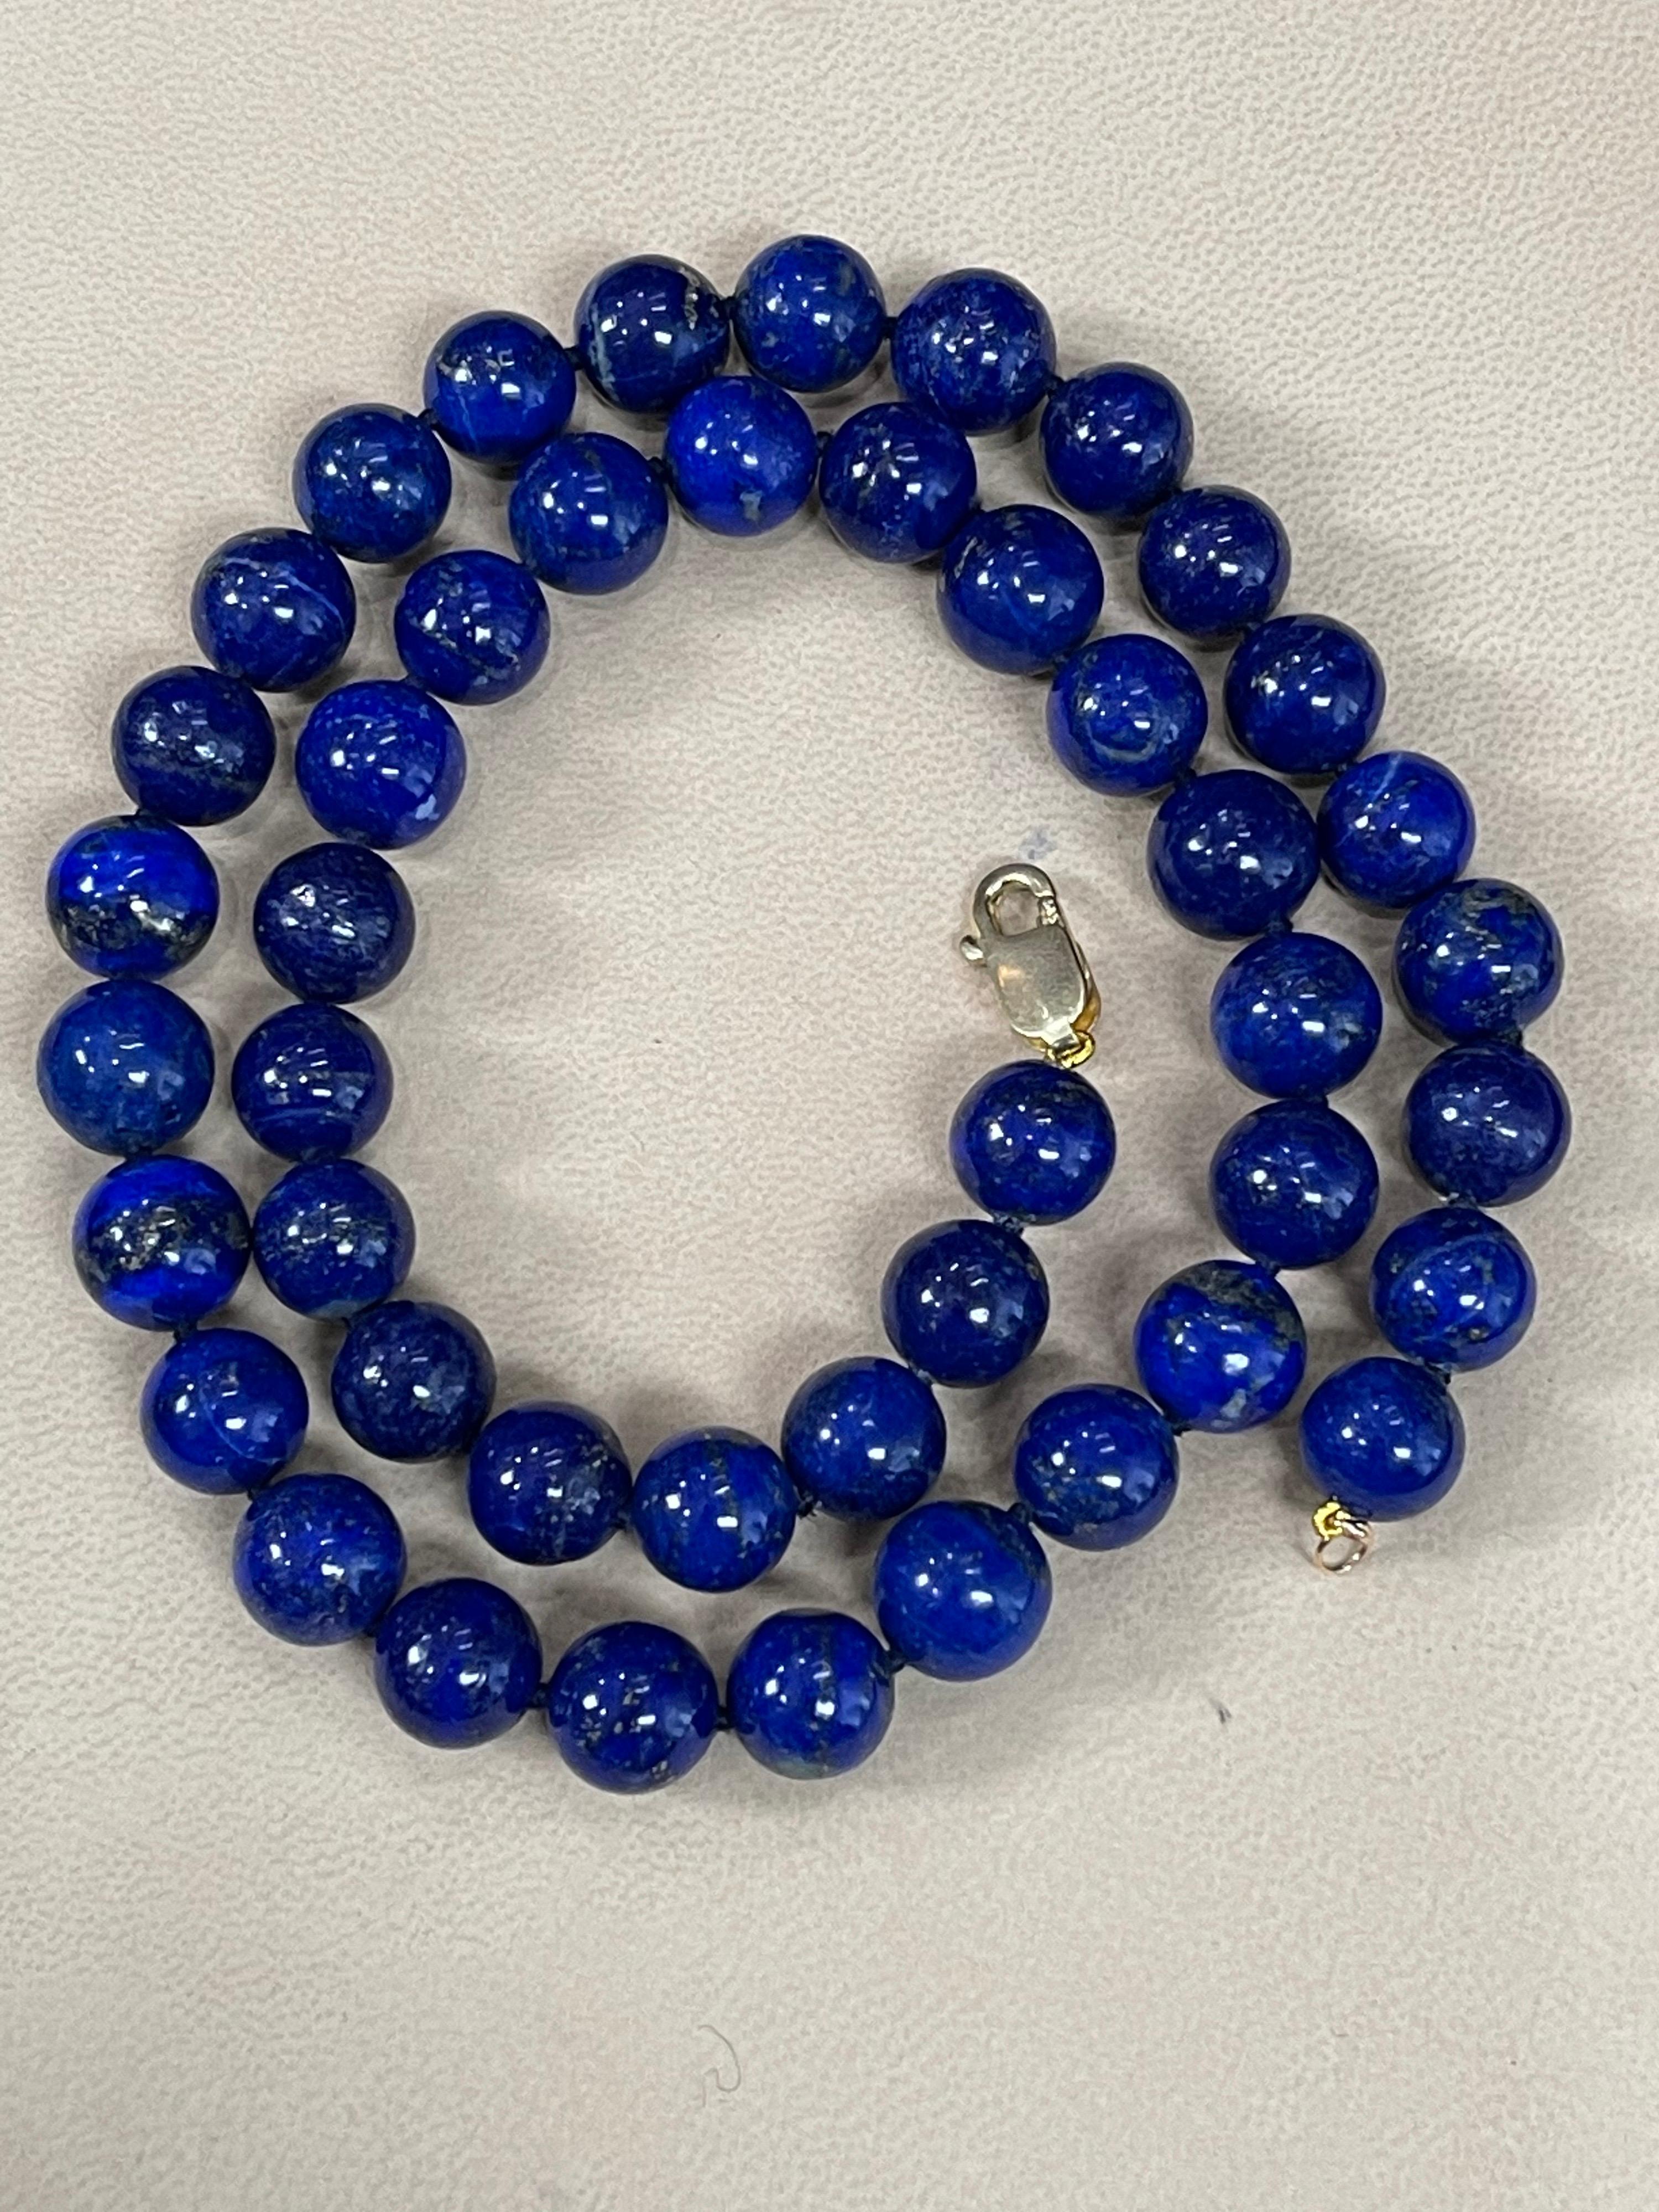 Vintage Lapis Lazuli Single Strand Necklace with 14 Karat Yellow Gold Lobster For Sale 7